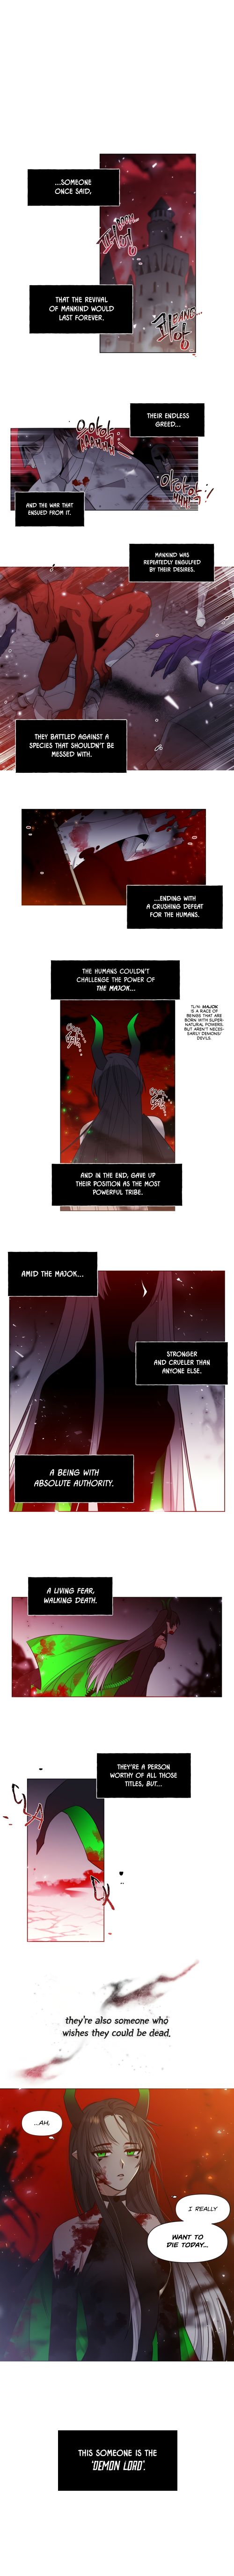 The Demon Lord Wants To Die - Page 2